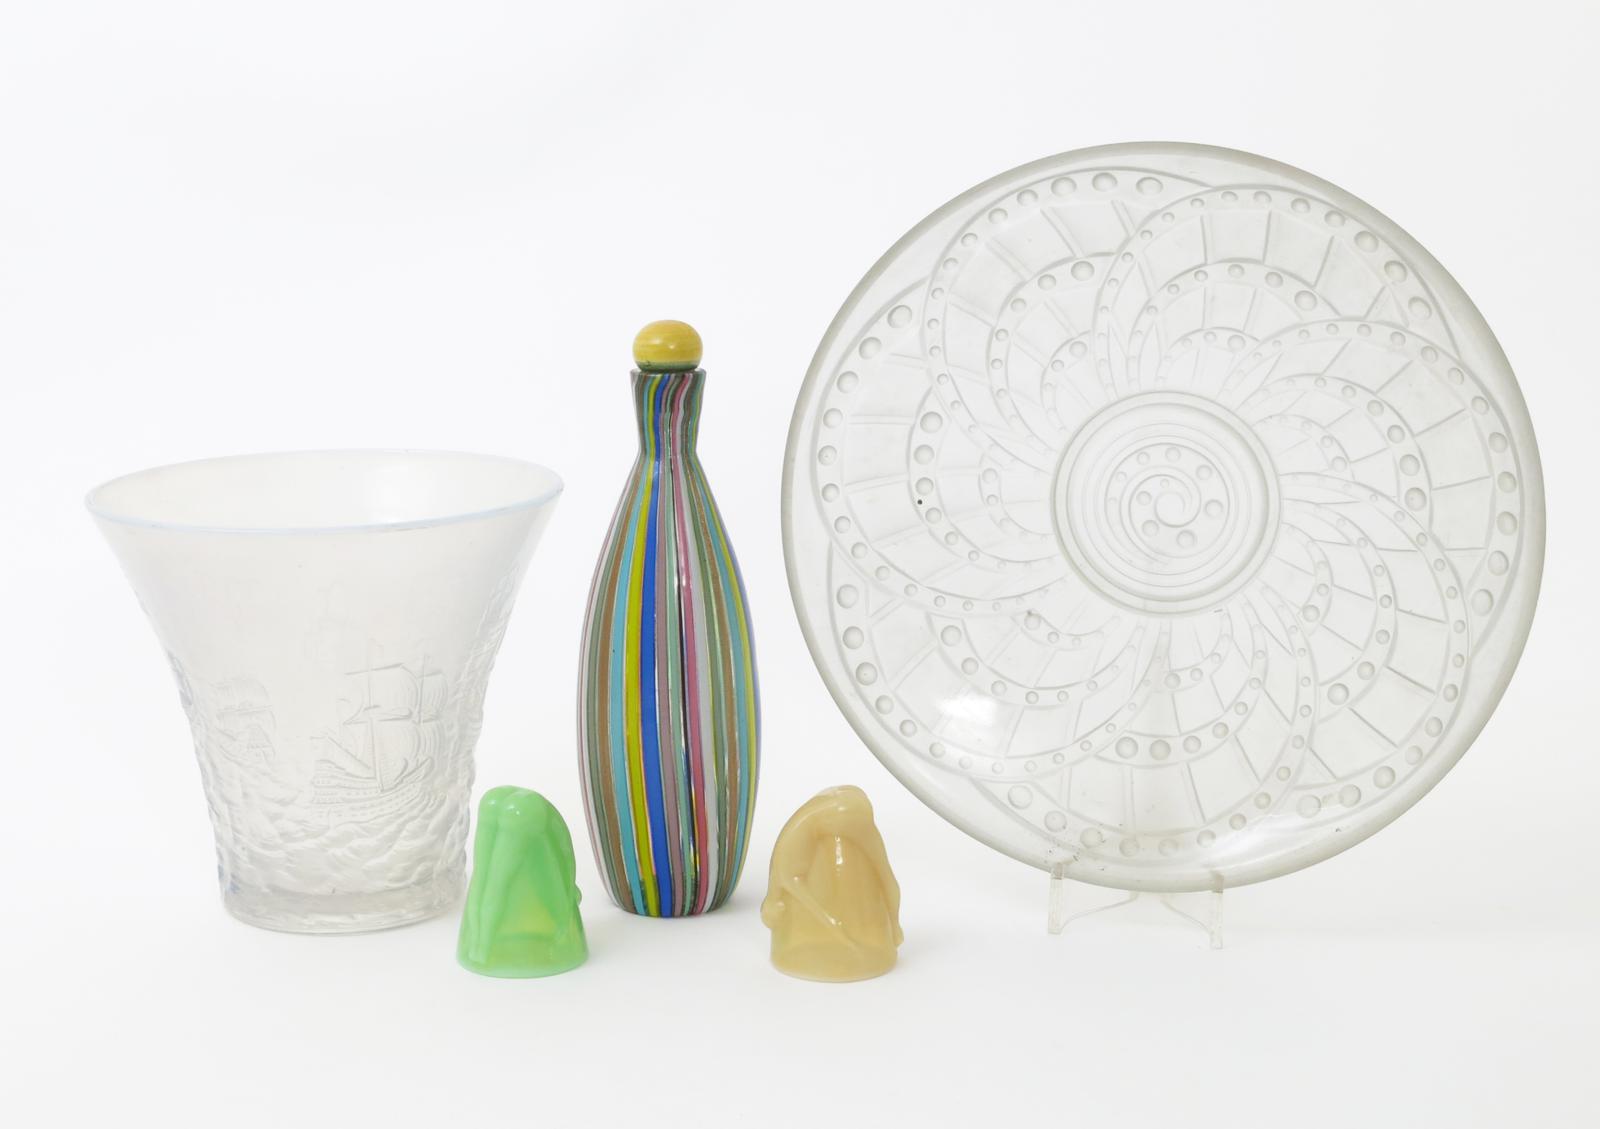 A Landier opalescent glass dish, moulded in low relief with radiating geometric swirls, an